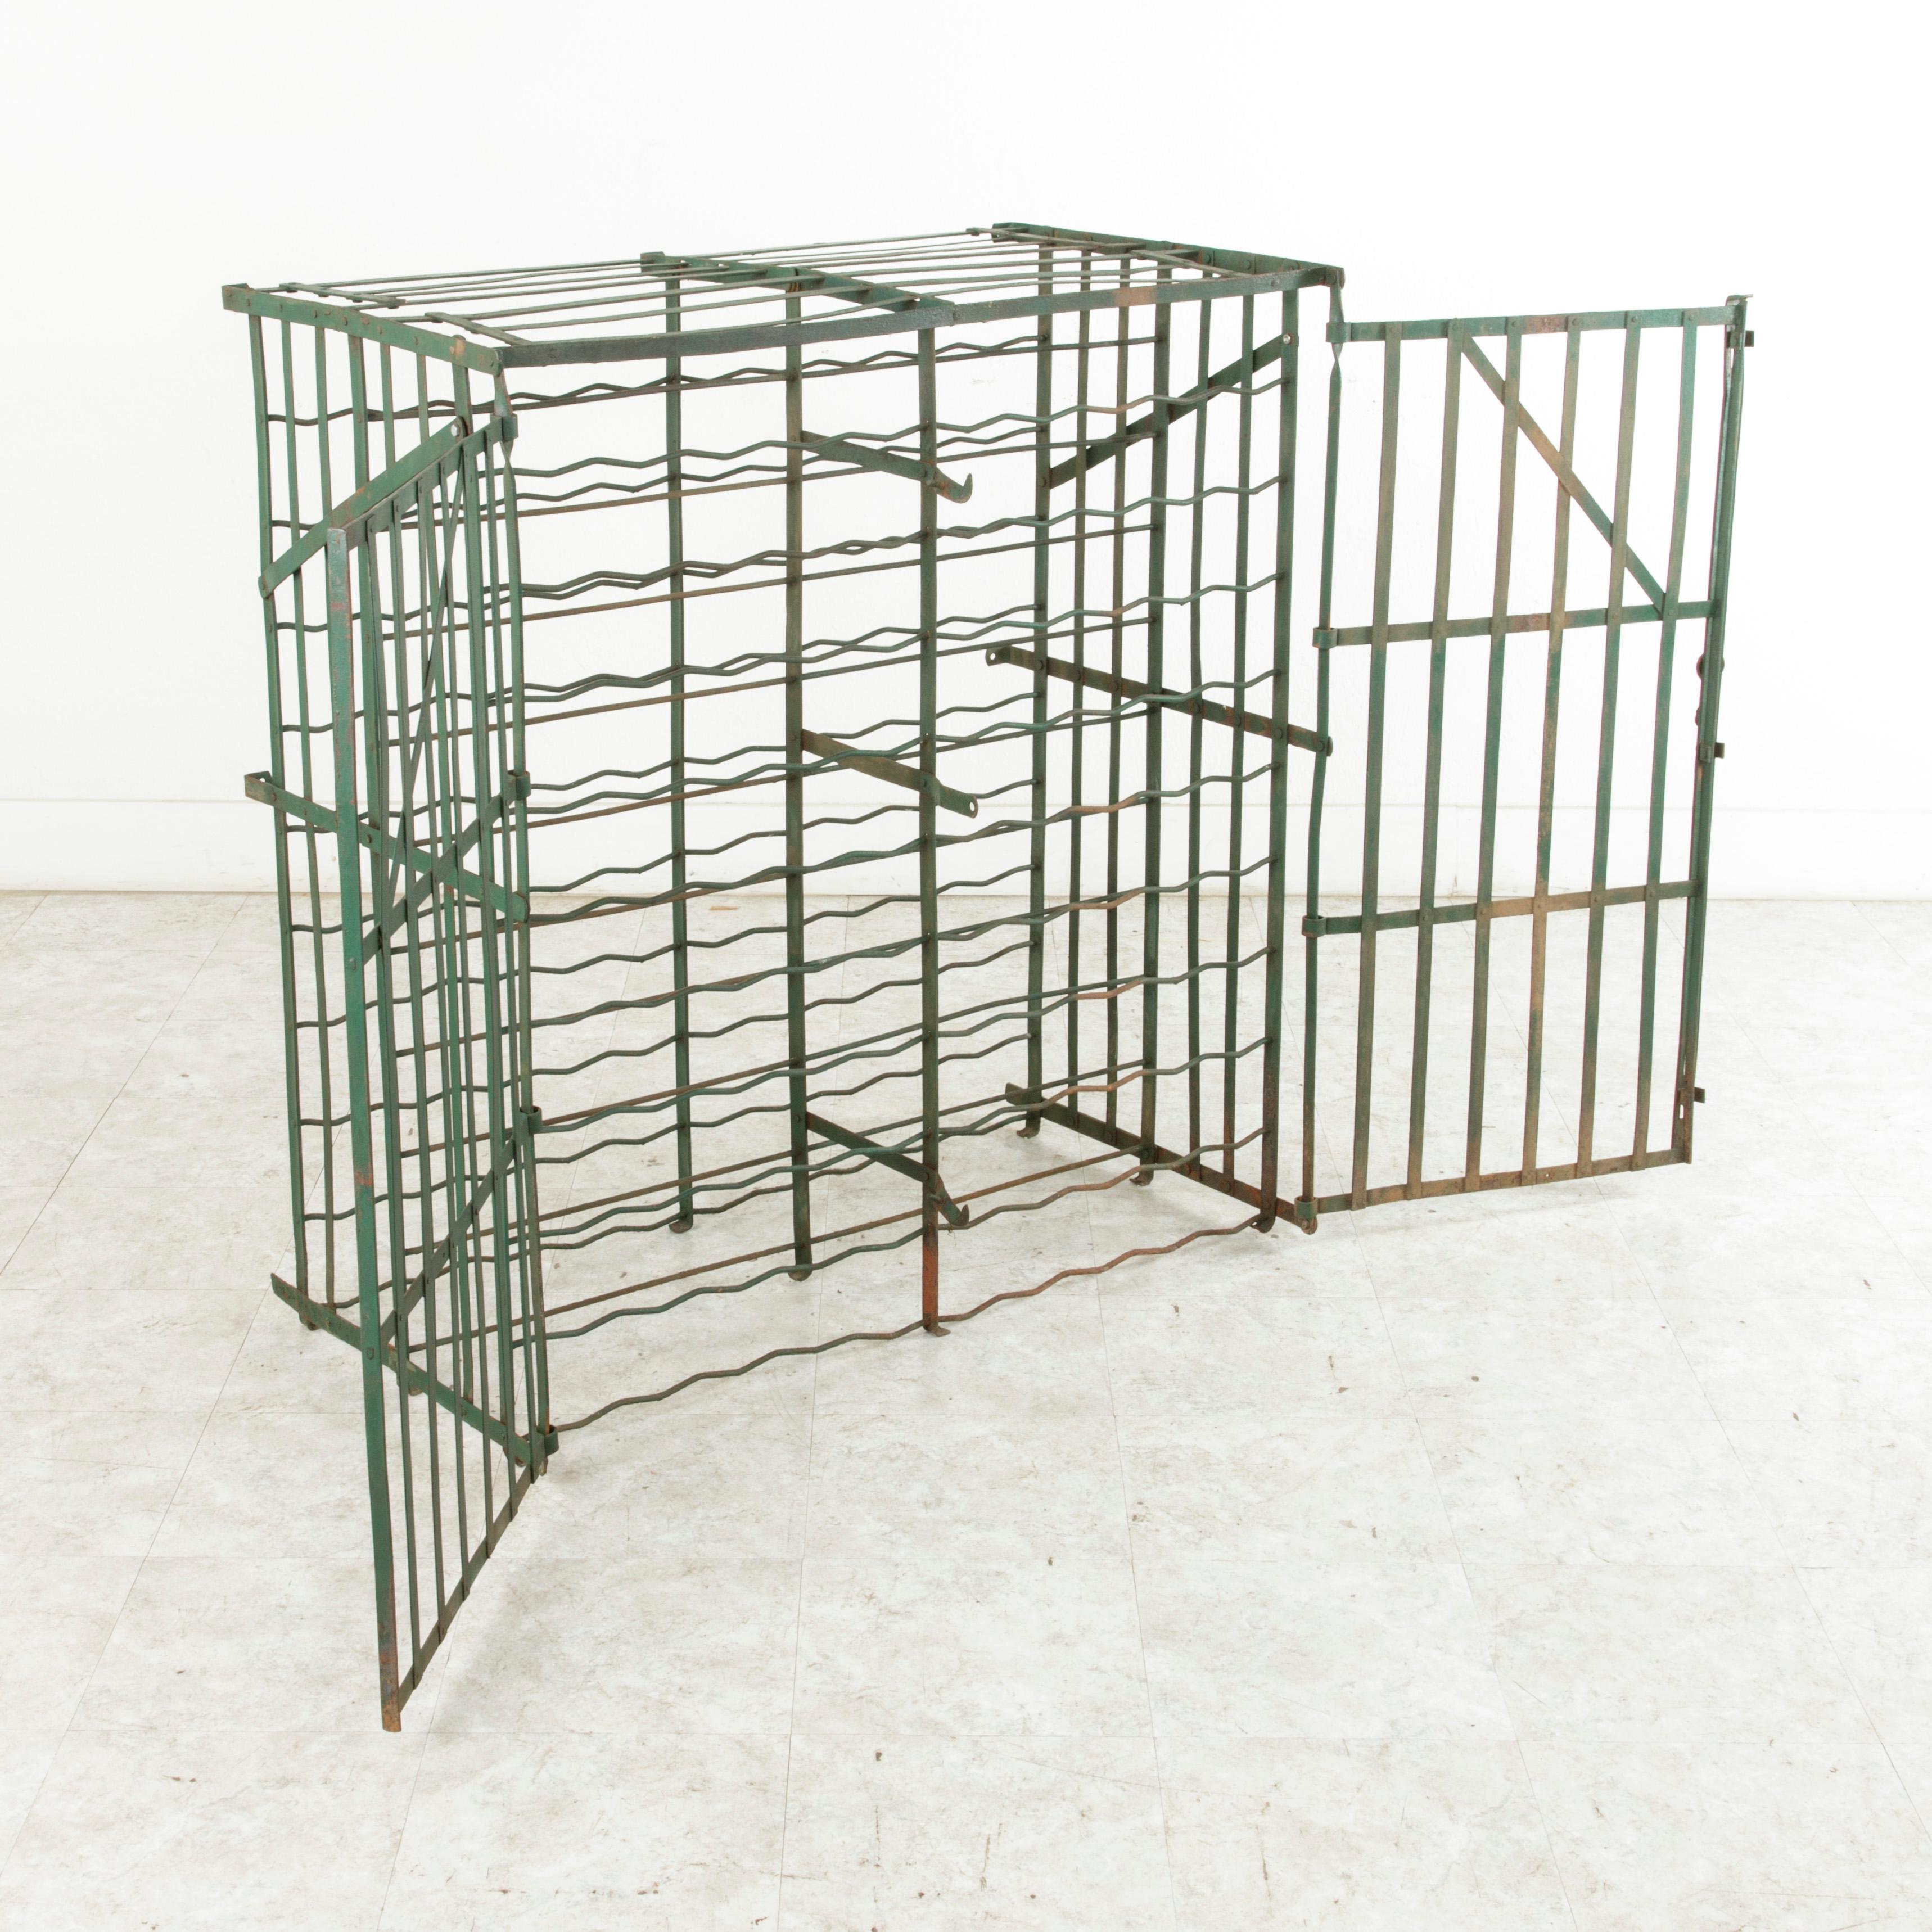 Early 20th Century French Riveted Iron Wine Cage or Wine Cellar for 200 Bottles 5